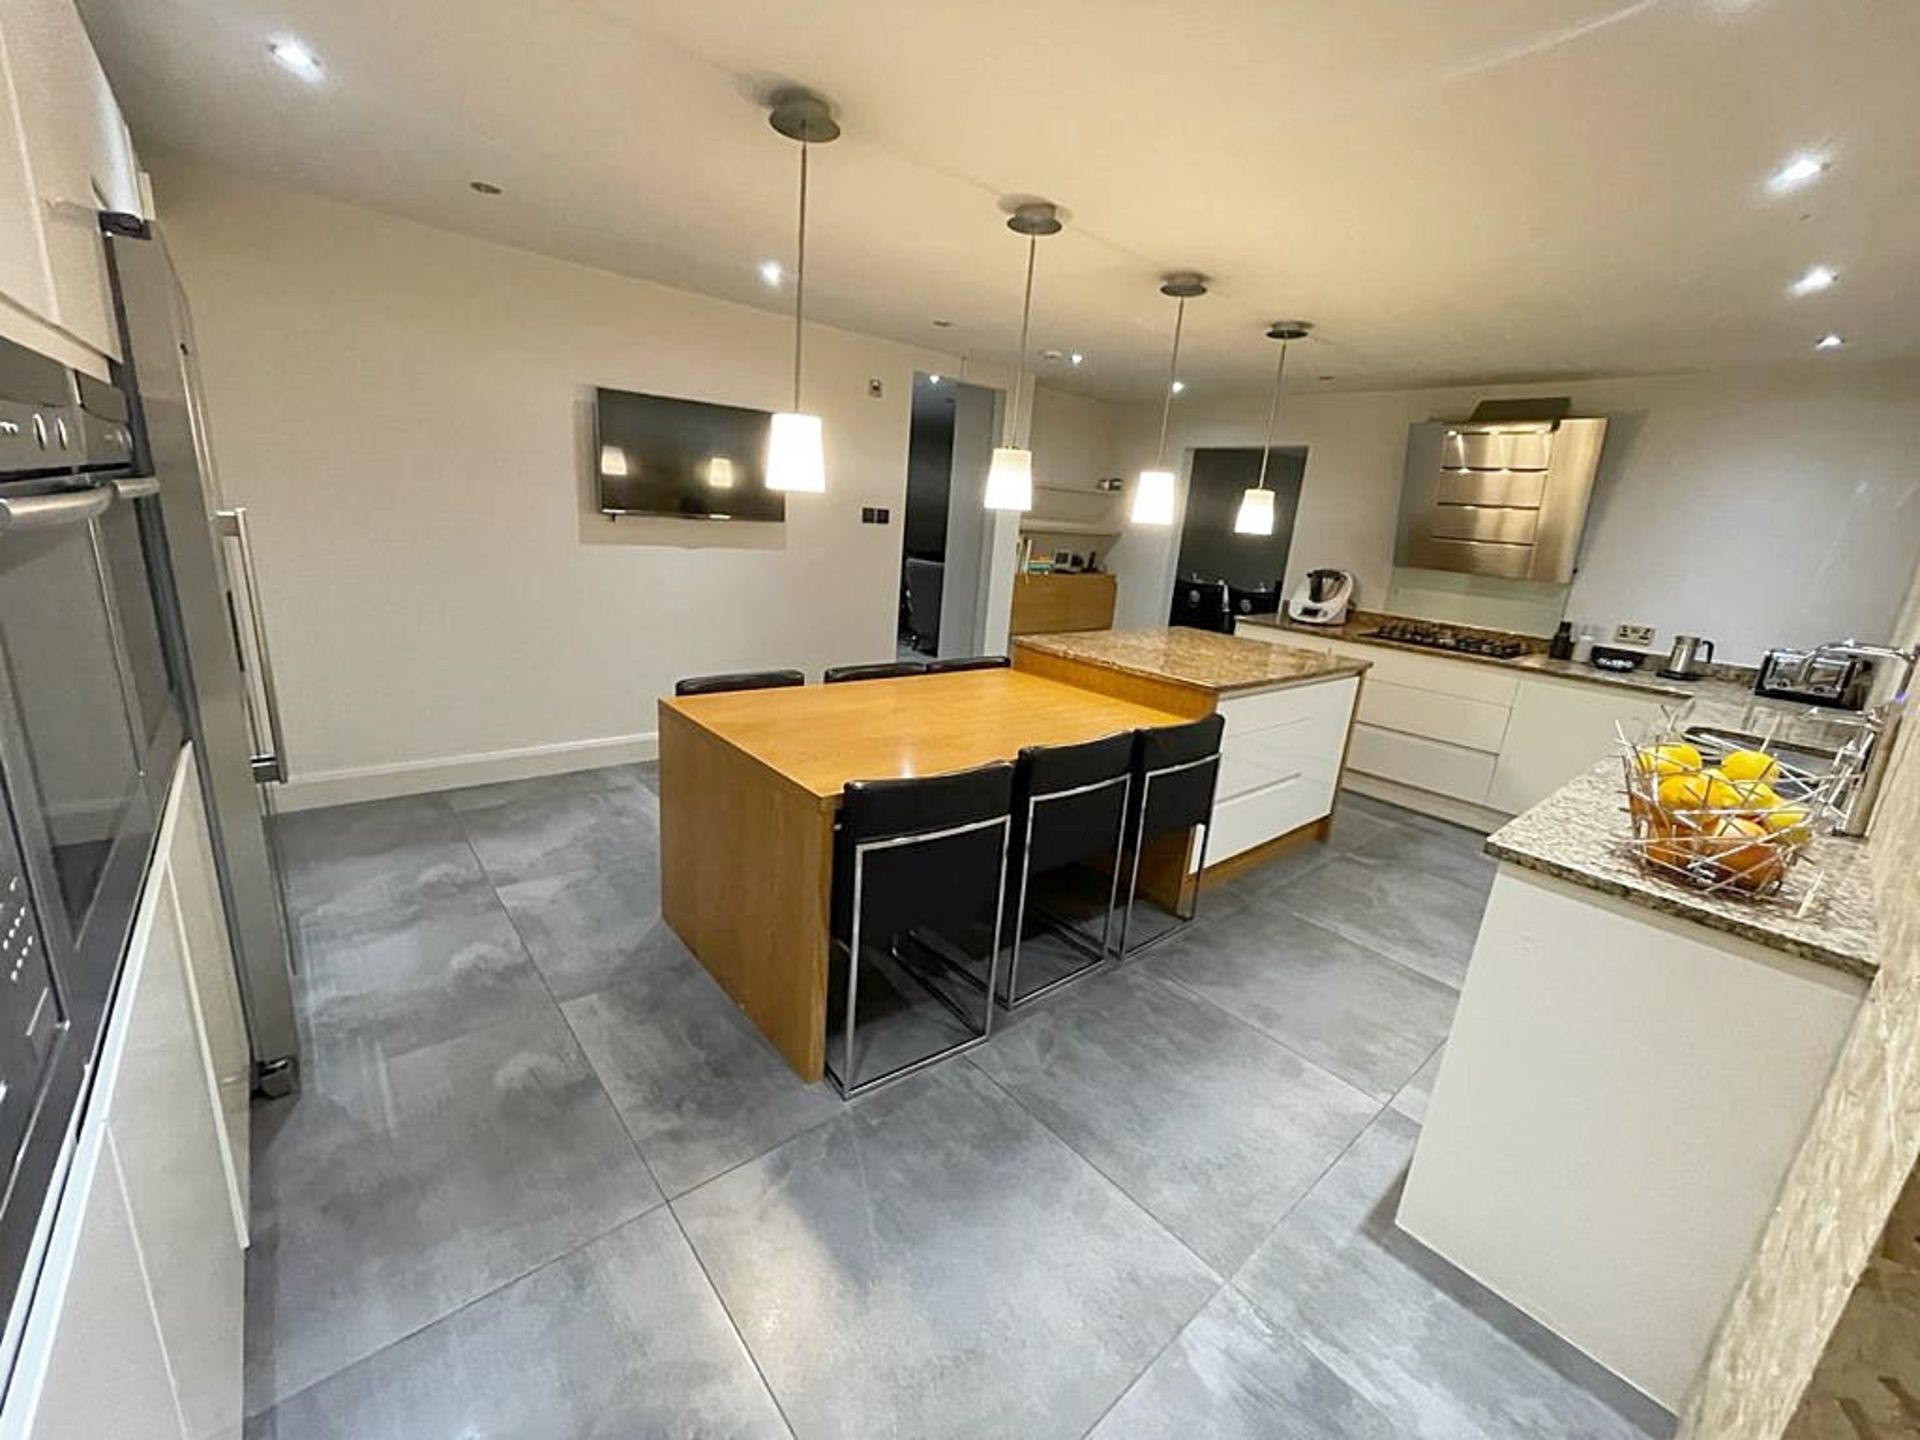 1 x Stunning PARAPAN Handleless Fitted Kitchen with Neff Appliances, Granite Worktops & Island - Image 80 of 126